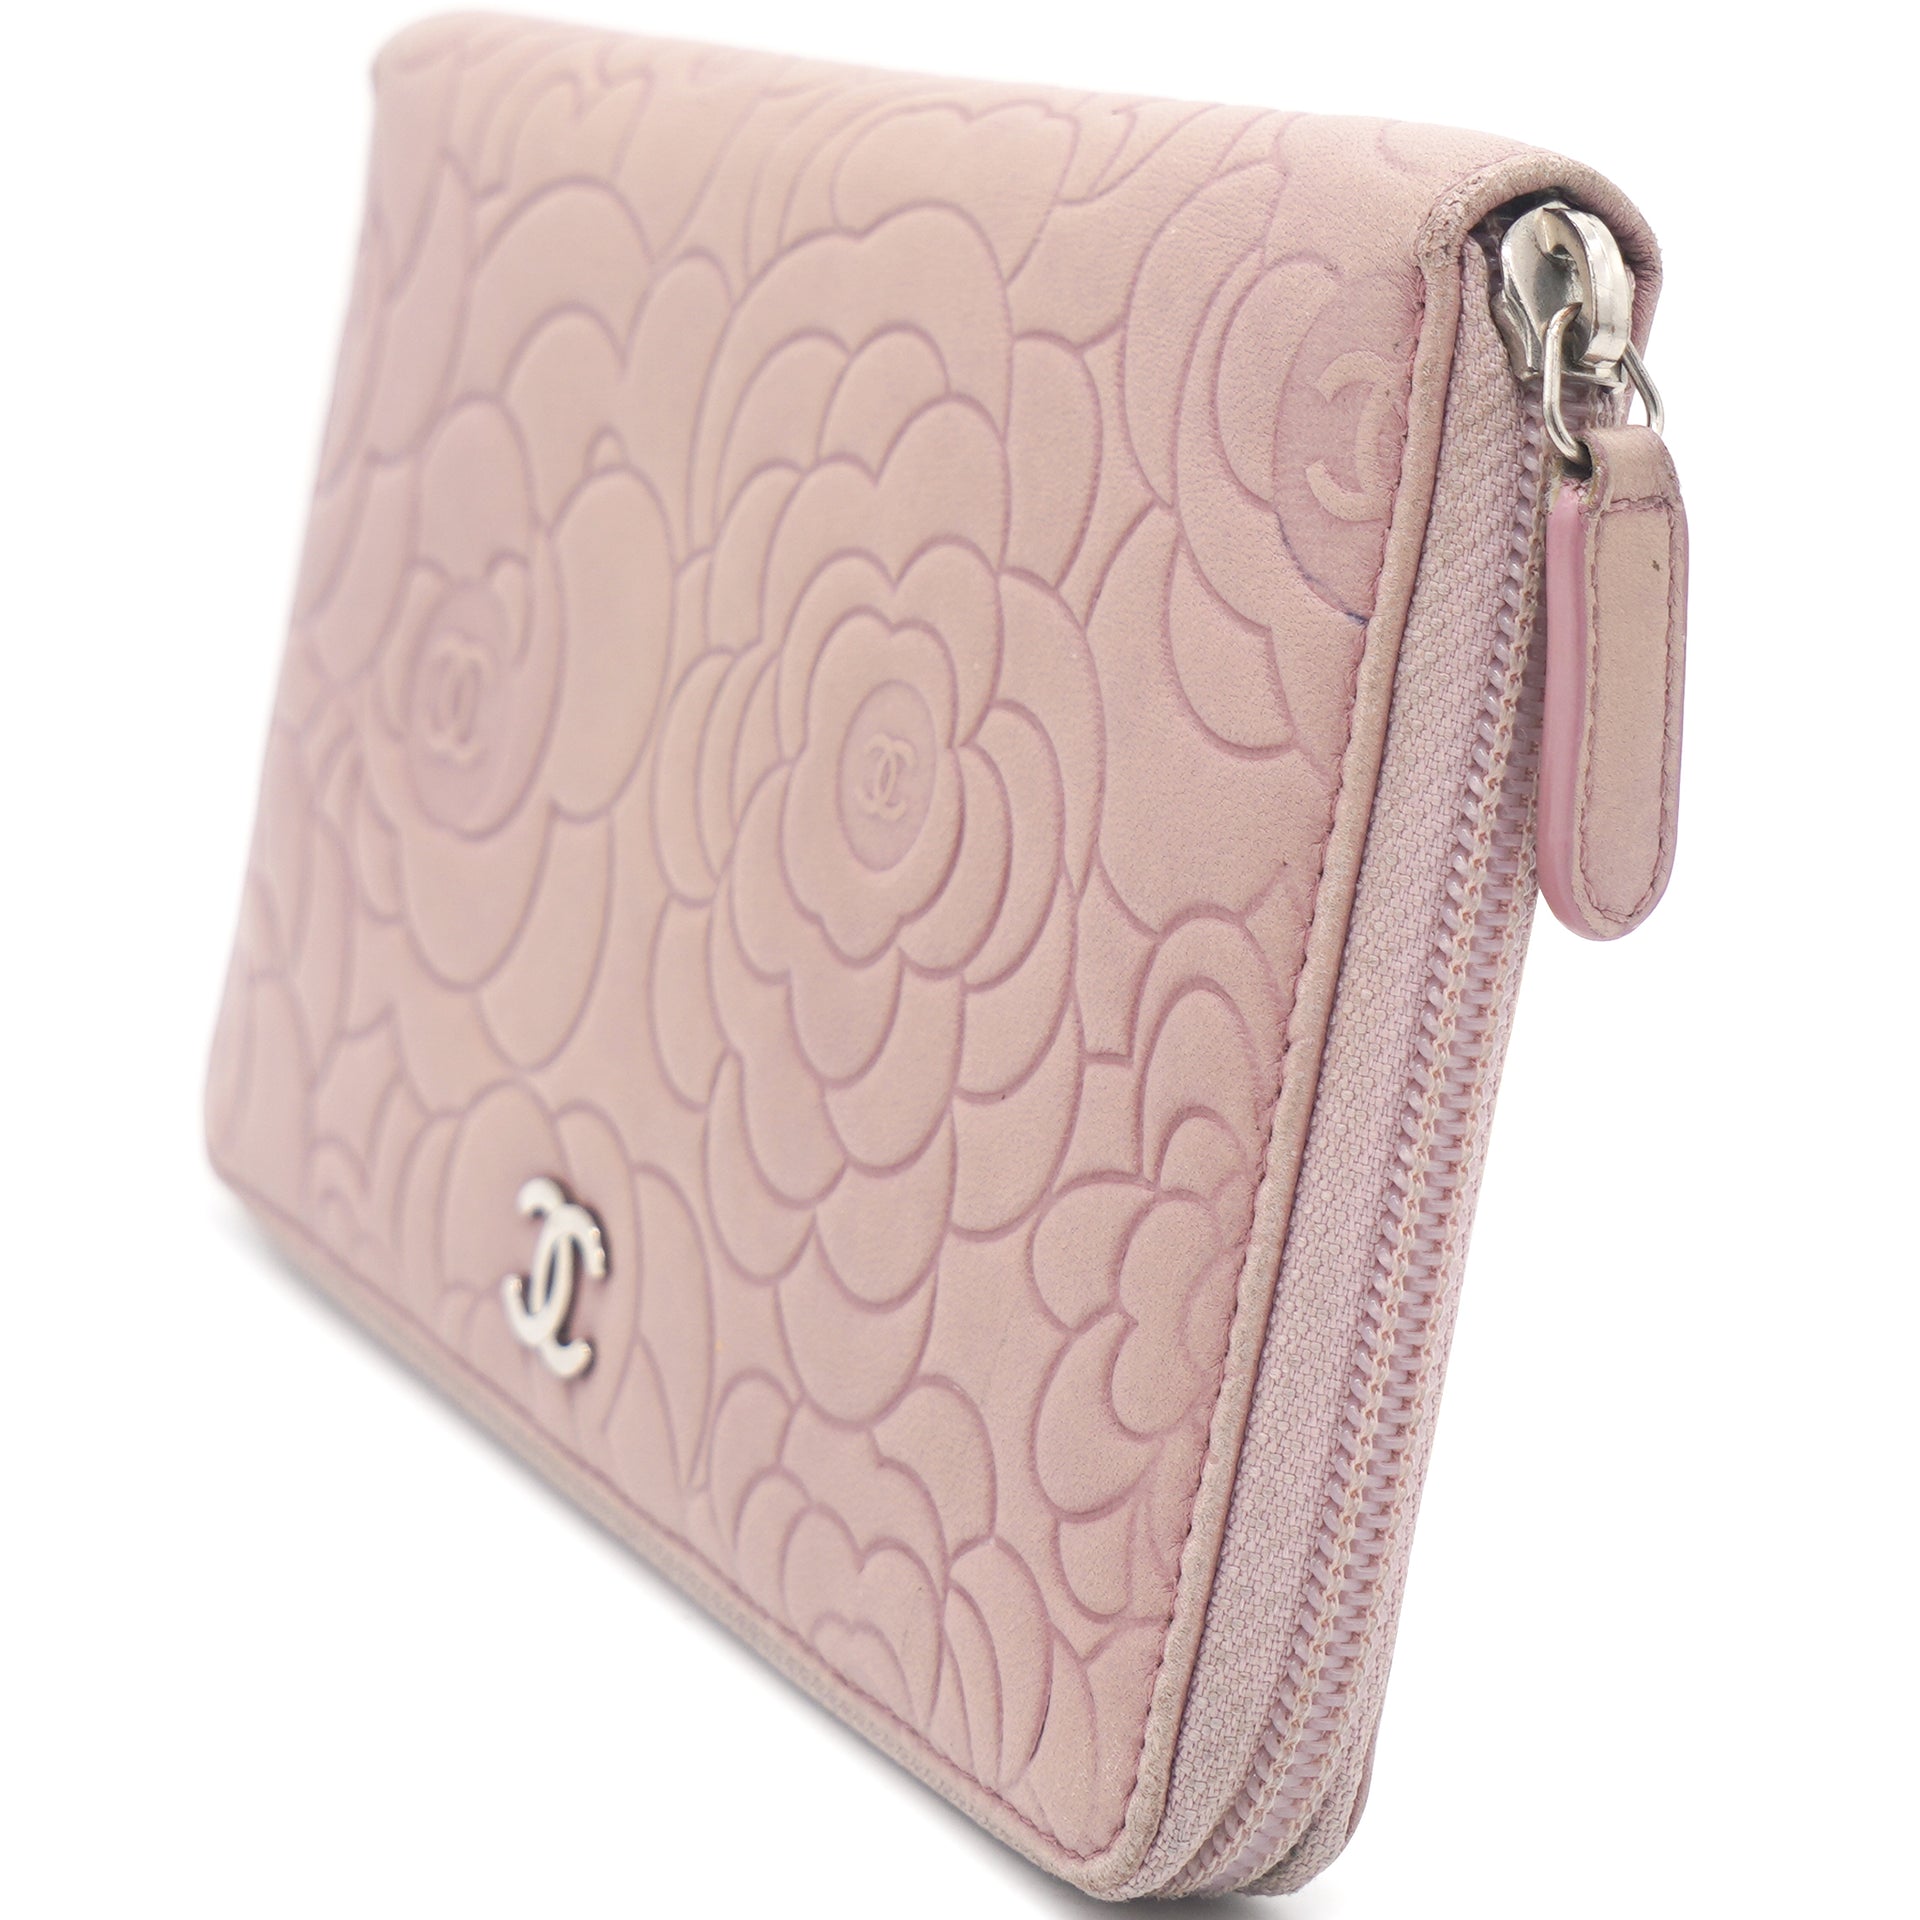 Chanel Pink Camellia Embossed Leather Zip Around Wallet Organizer  (Preloved) - Aftersix Lifestyle Inc.